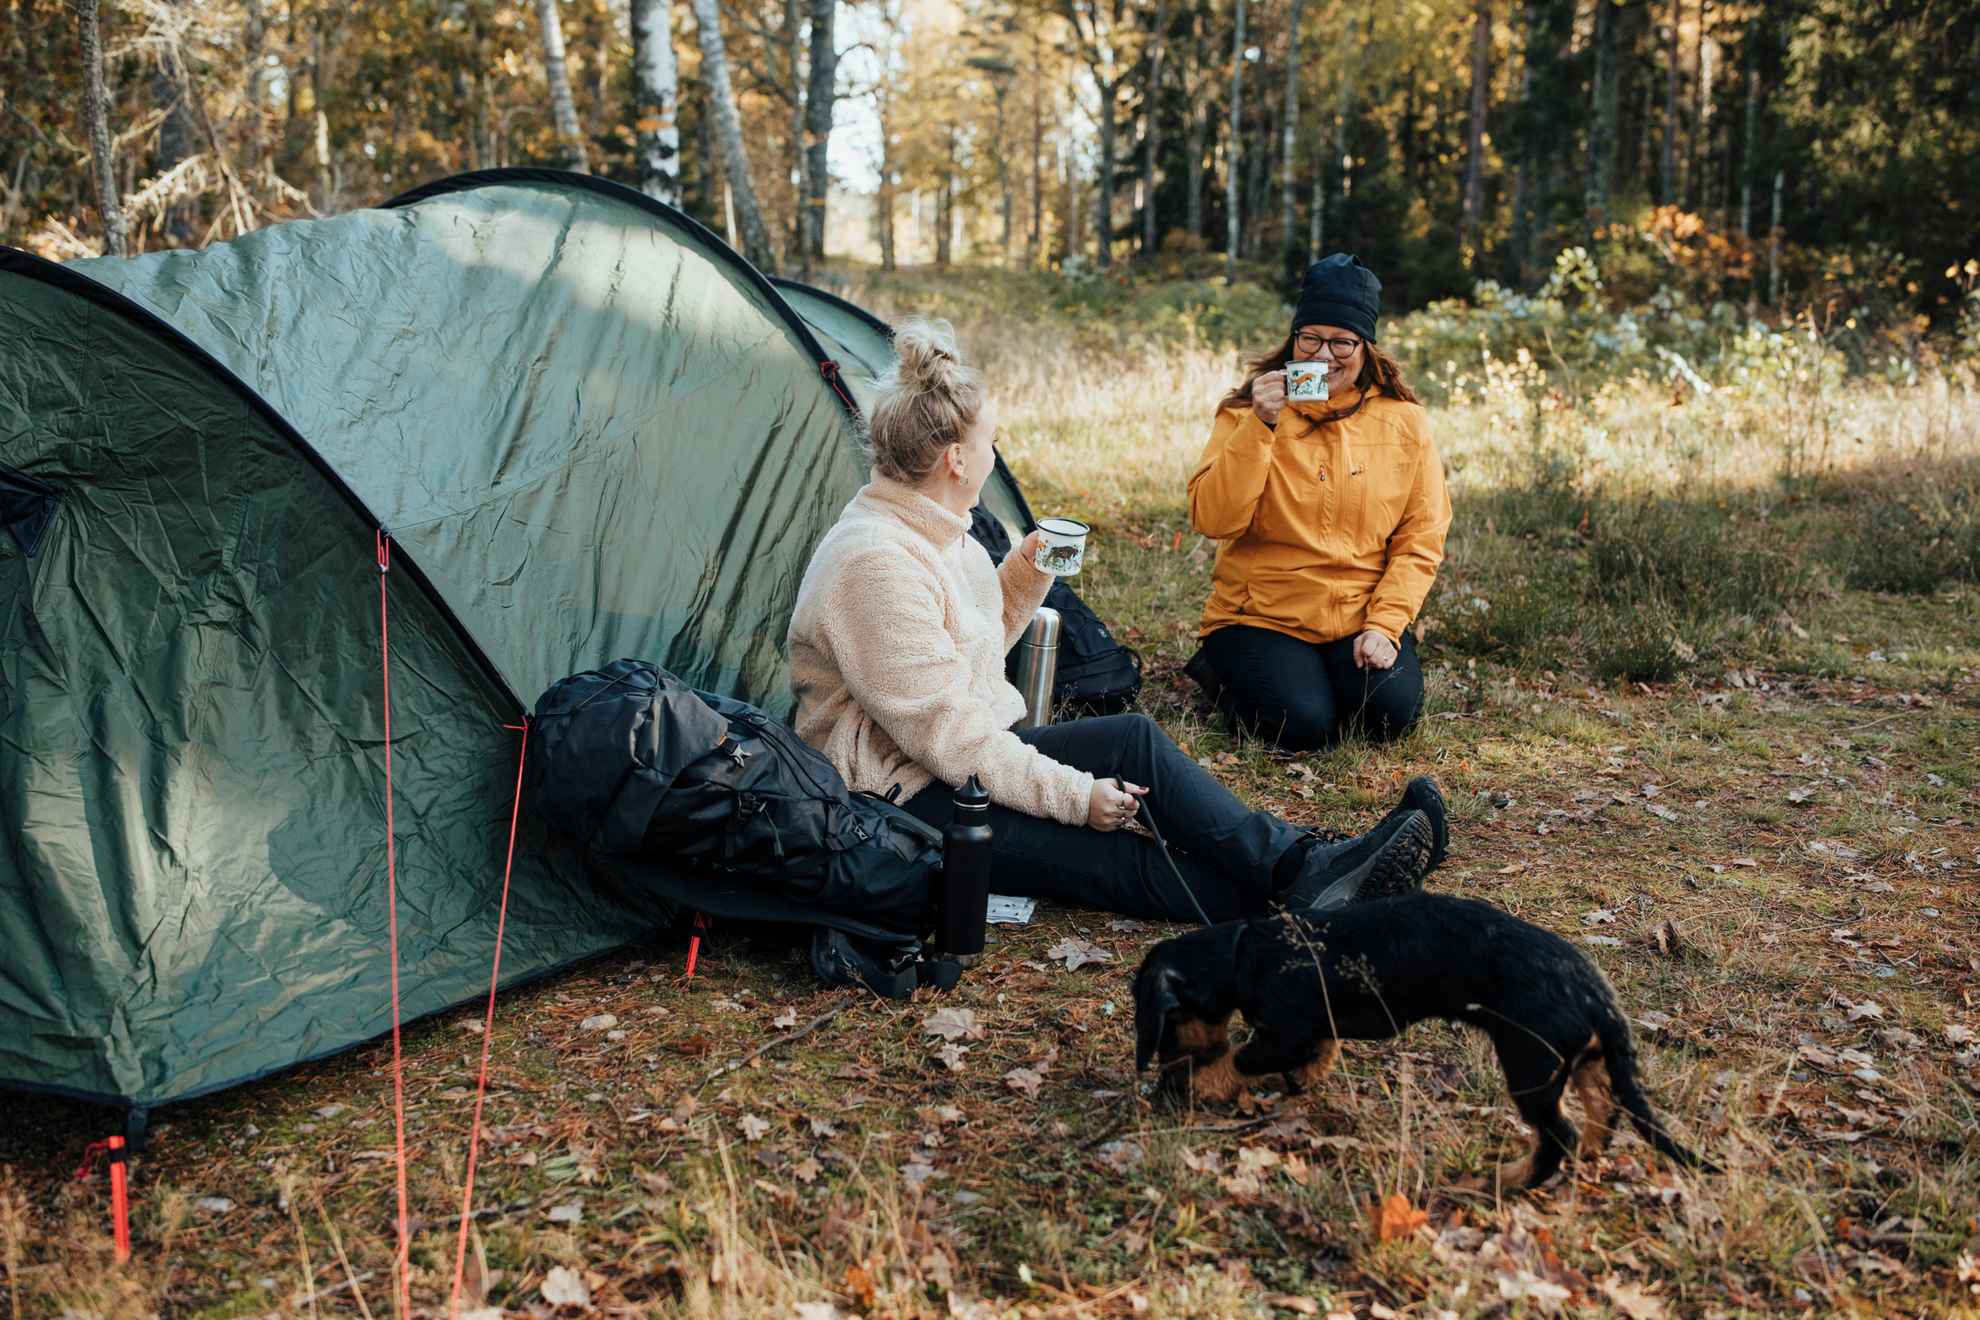 Two women in outdoor clothing sit on the leafy ground next to a tent and drink coffee from mugs. A black dachshund can be seen in the foreground.